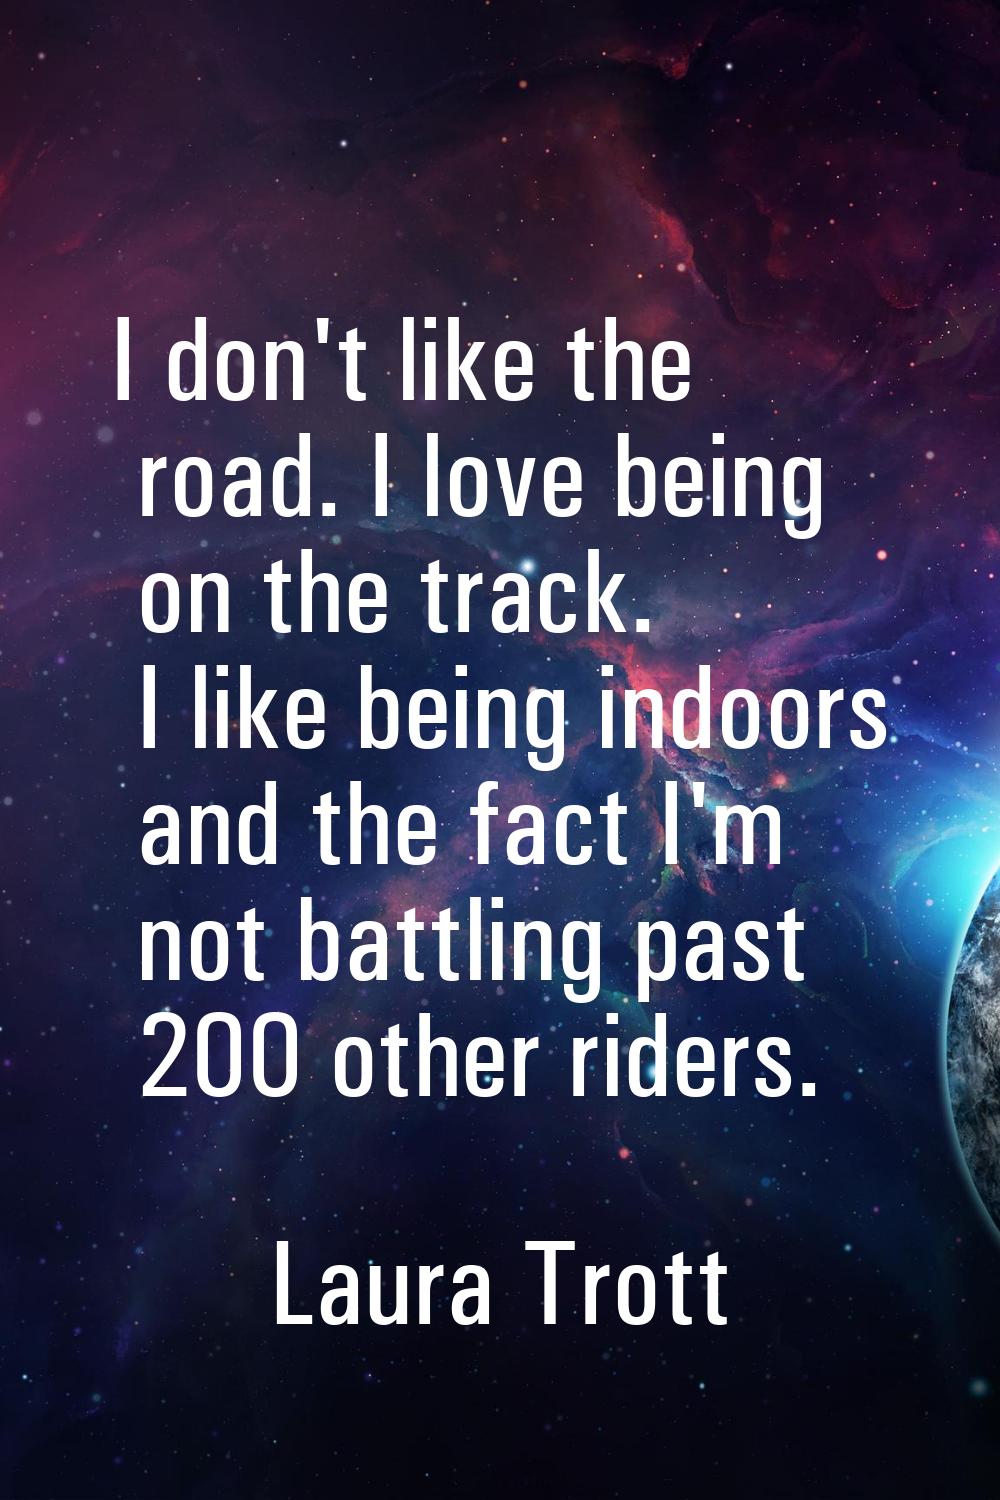 I don't like the road. I love being on the track. I like being indoors and the fact I'm not battlin